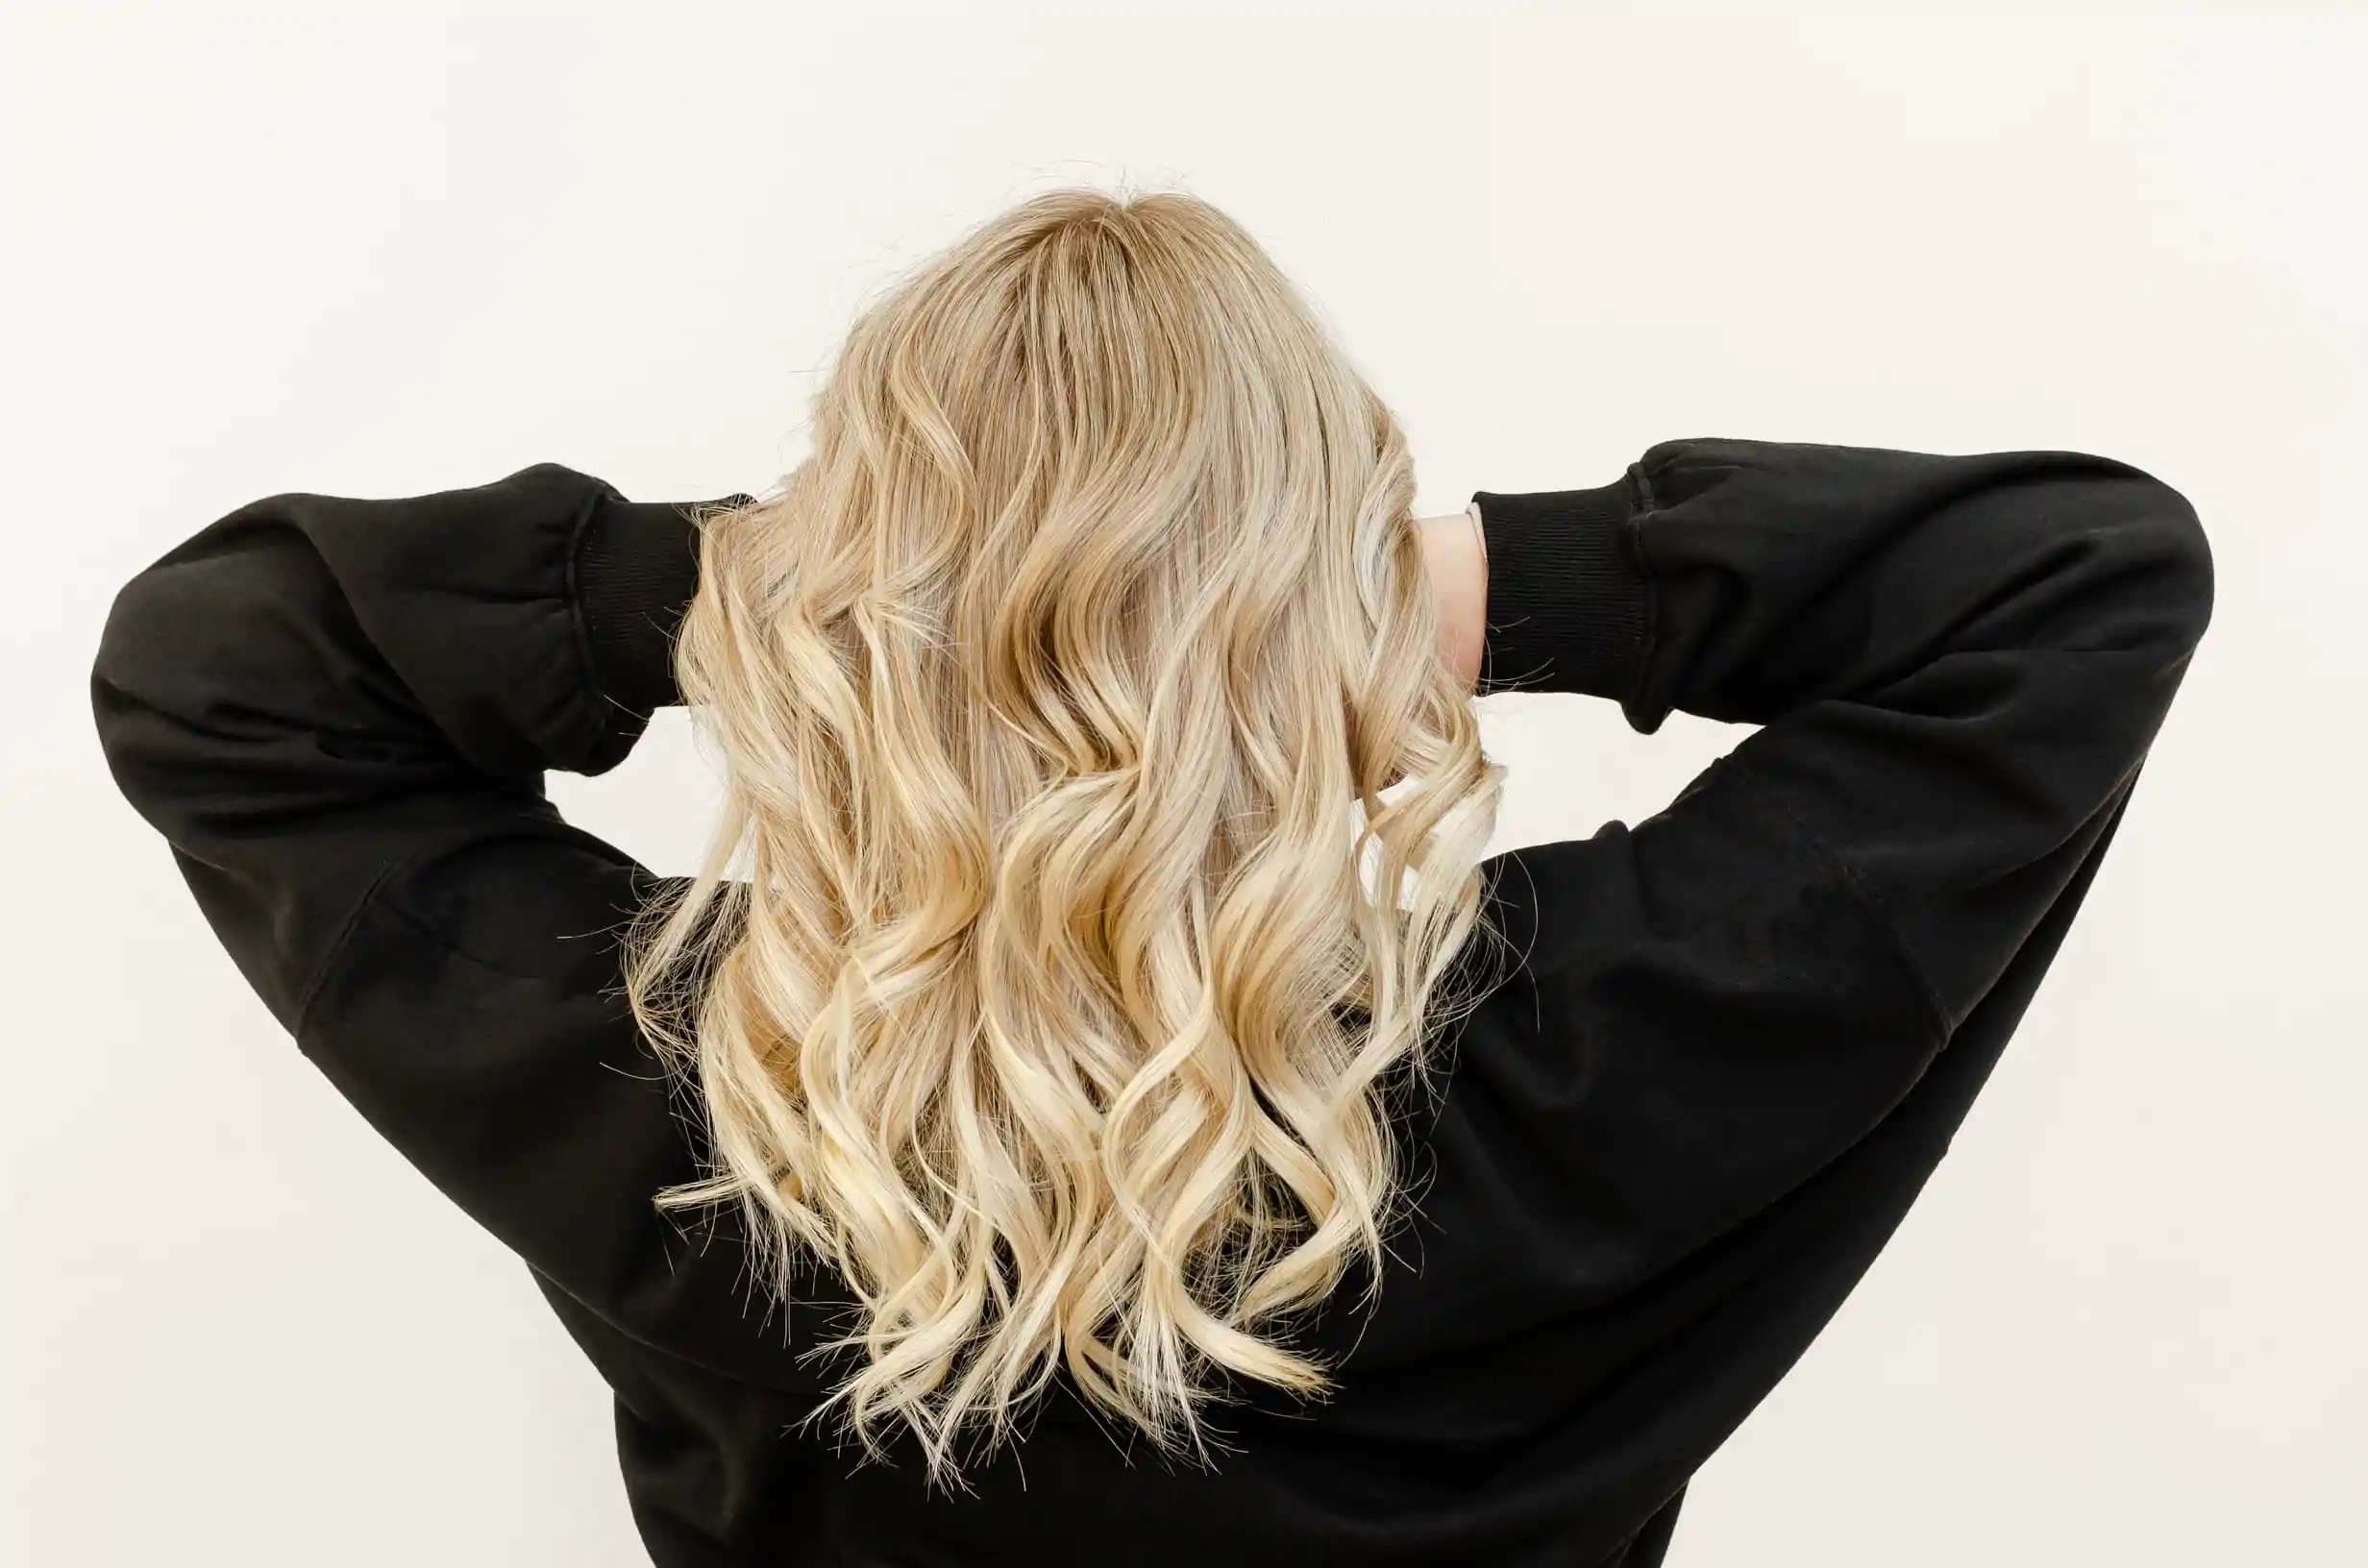 What You Need to Know About Balayage?